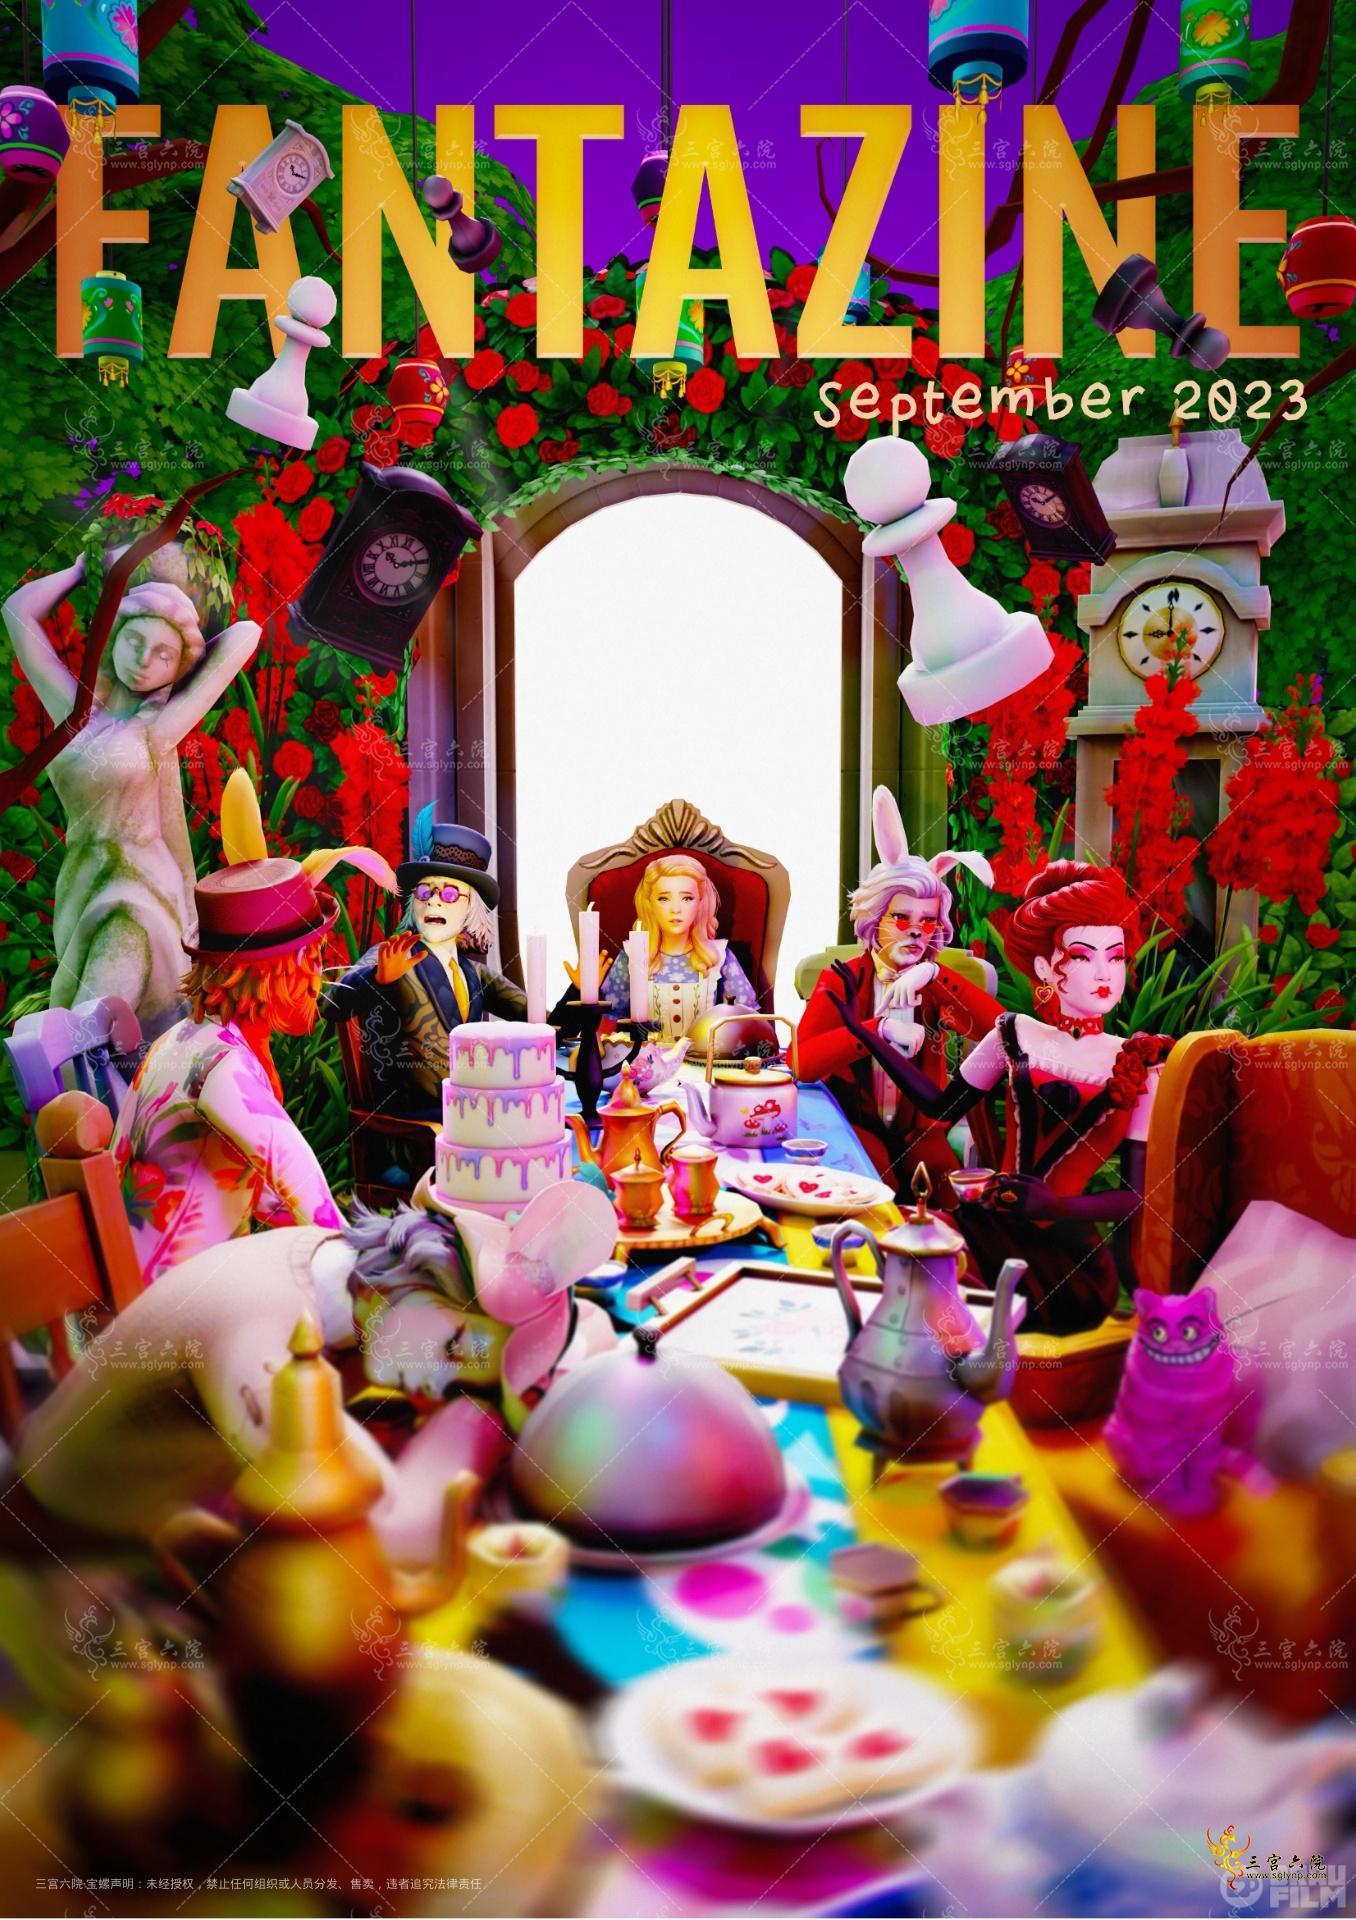 Simblreen 2023 Fantazine - An exclusive magazine for patrons of the fantasy save.jpg